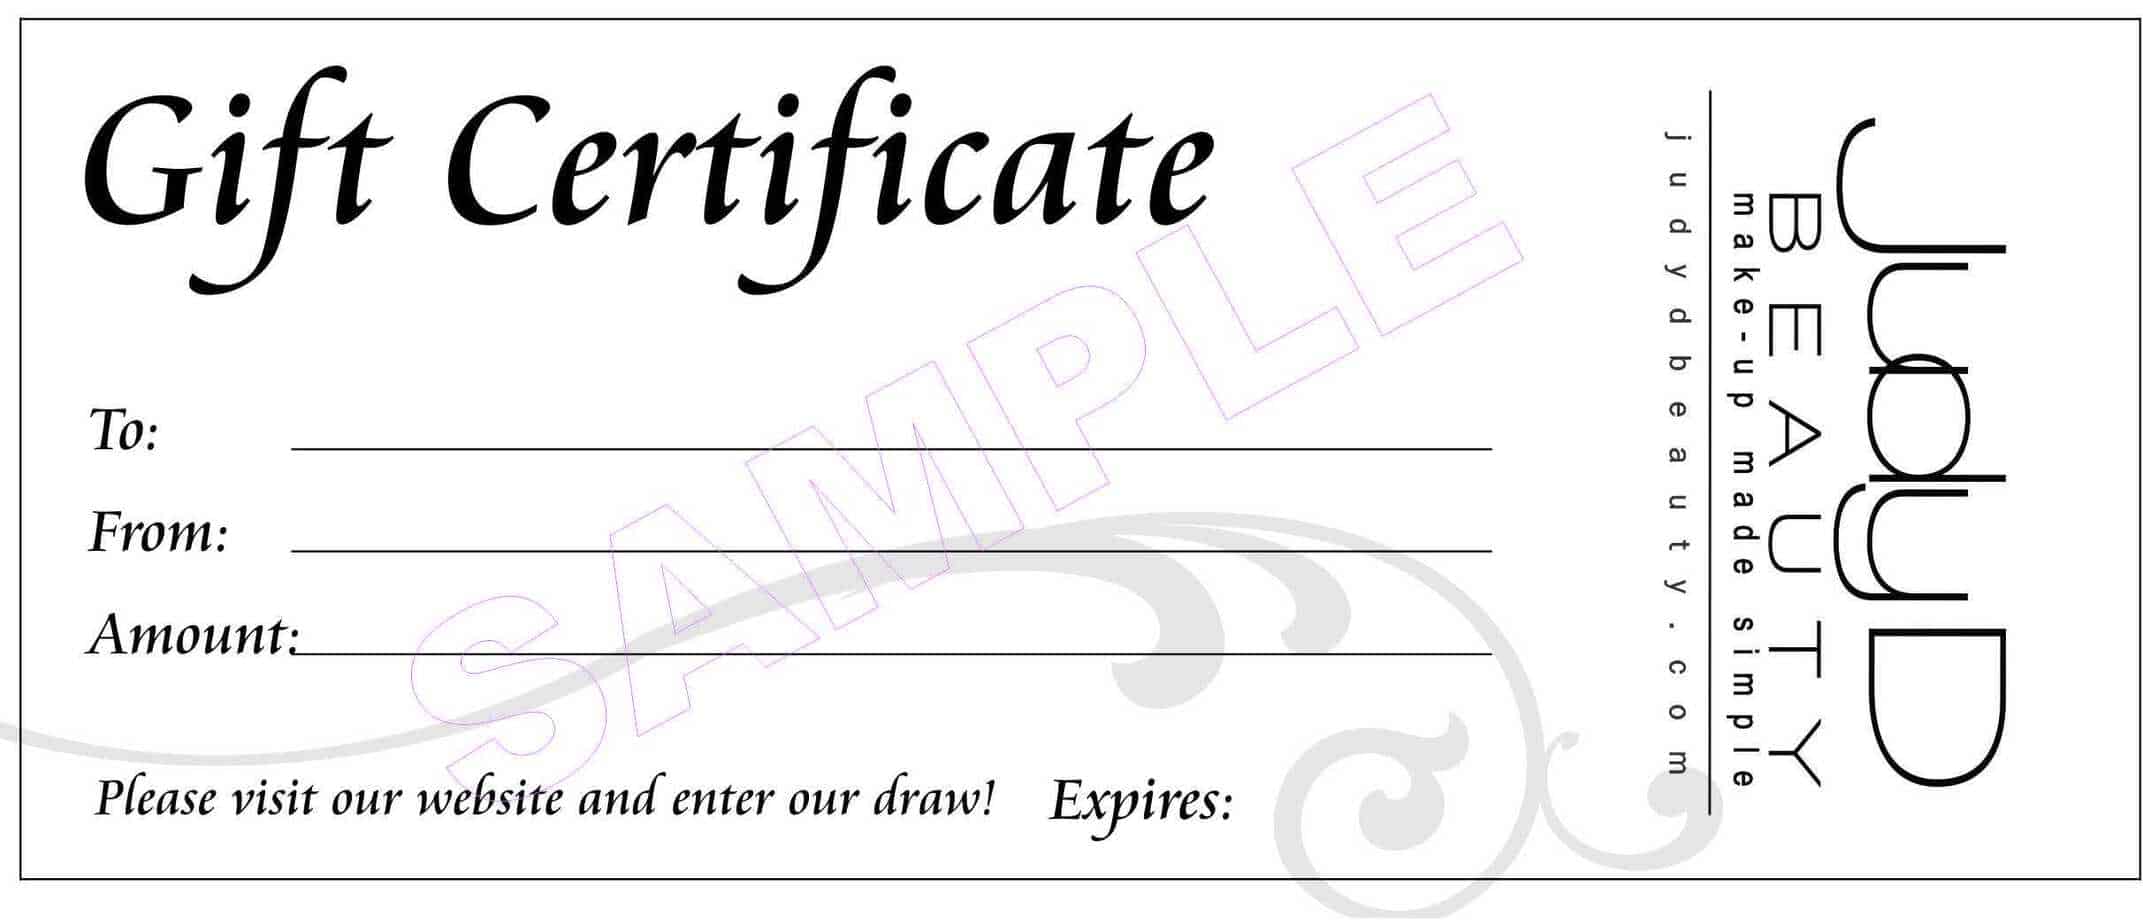 gift certififate template 9963